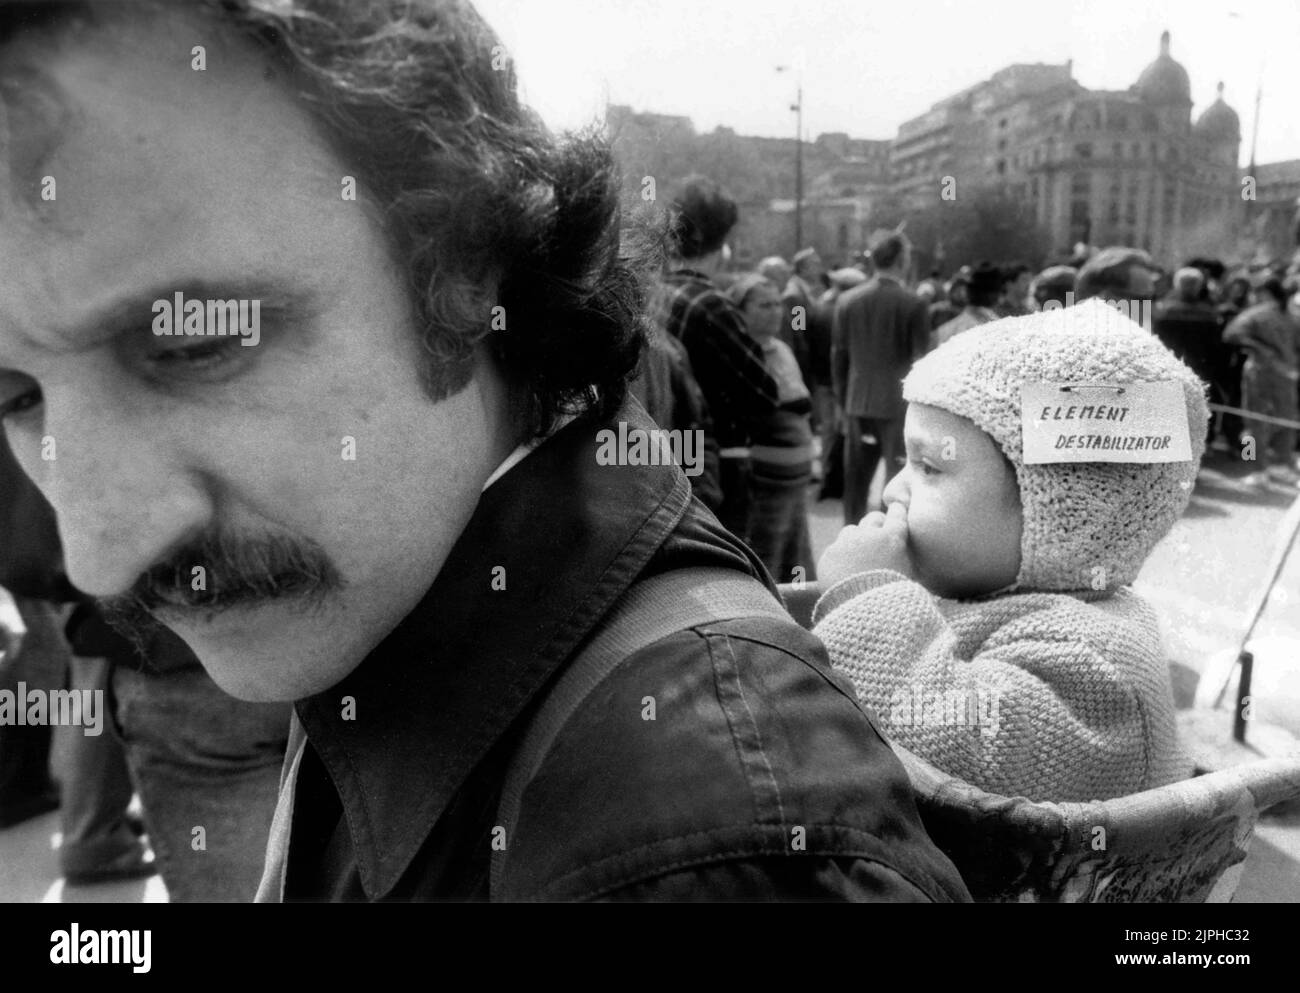 Bucharest, Romania, April 1990. 'Golaniada', a major anti-communism protest  in the University Square following the Romanian Revolution of 1989. People would gather daily to protest the ex-communists that grabbed the power after the Revolution. A father is carrying his baby, tagged as a 'destabilizing element'. This came after the state-controlled media called the protesters various injurious names. Stock Photo